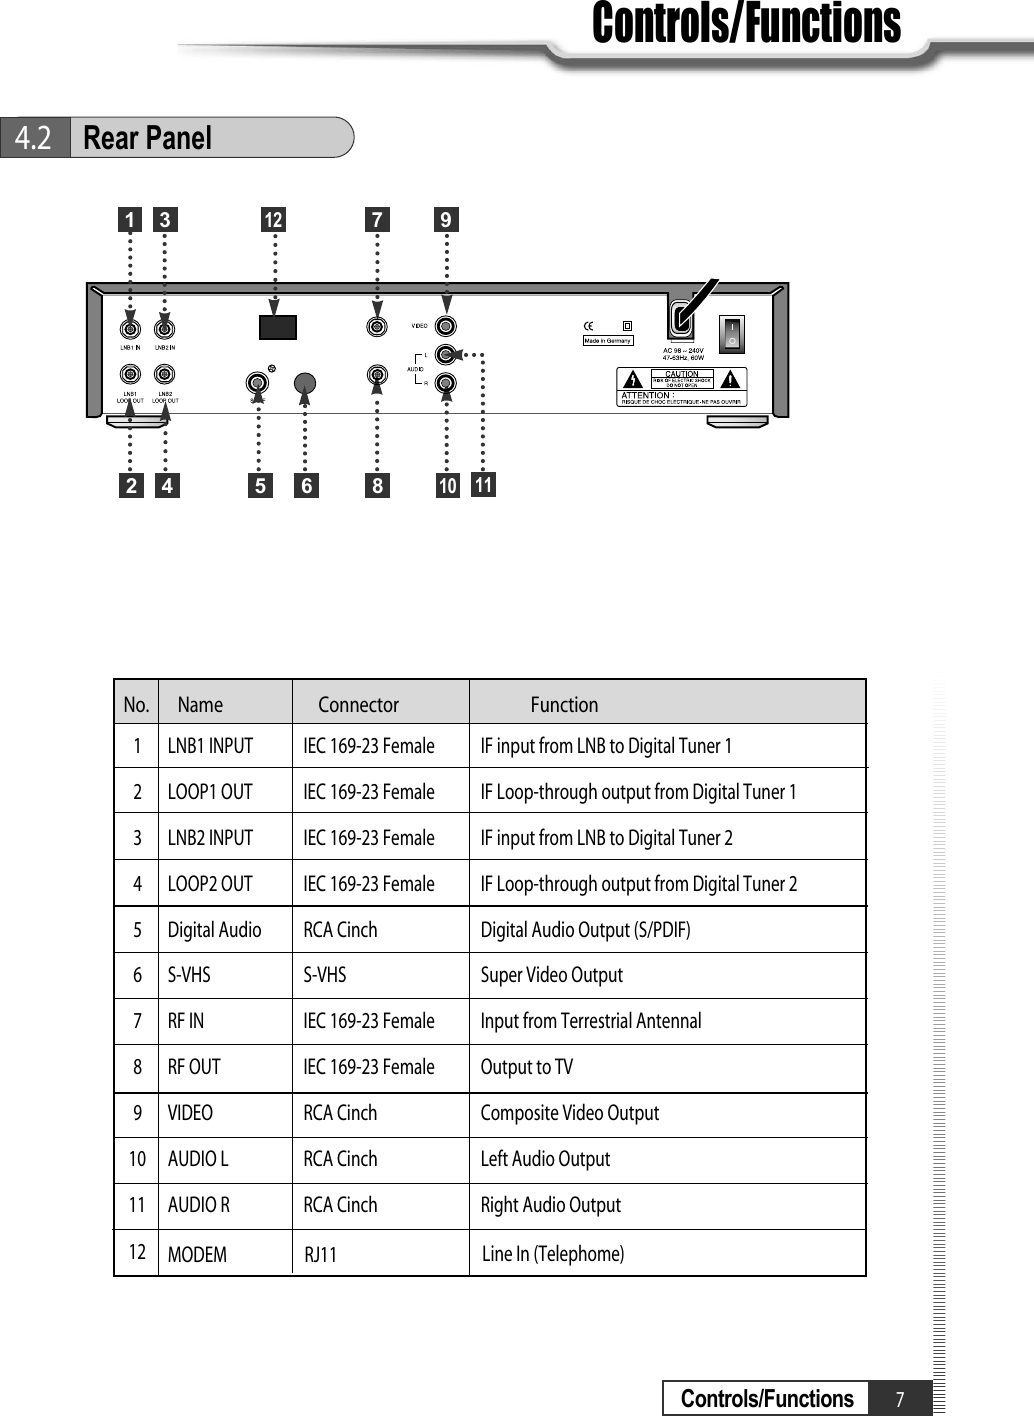 7Controls/FunctionsControls/Functions4.2Rear PanelNo. Name Connector Function1 LNB1 INPUT IEC 169-23 Female IF input from LNB to Digital Tuner 12 LOOP1 OUT  IEC 169-23 Female IF Loop-through output from Digital Tuner 13 LNB2 INPUT IEC 169-23 Female IF input from LNB to Digital Tuner 24 LOOP2 OUT IEC 169-23 Female IF Loop-through output from Digital Tuner 25 Digital Audio RCA Cinch Digital Audio Output (S/PDIF)6 S-VHS S-VHS Super Video Output7 RF IN IEC 169-23 Female Input from Terrestrial Antennal8 RF OUT IEC 169-23 Female Output to TV9 VIDEO RCA Cinch Composite Video Output10 AUDIO L RCA Cinch Left Audio Output11 AUDIO R RCA Cinch Right Audio Output319112 456781012MODEMRJ11Line In (Telephome)1210